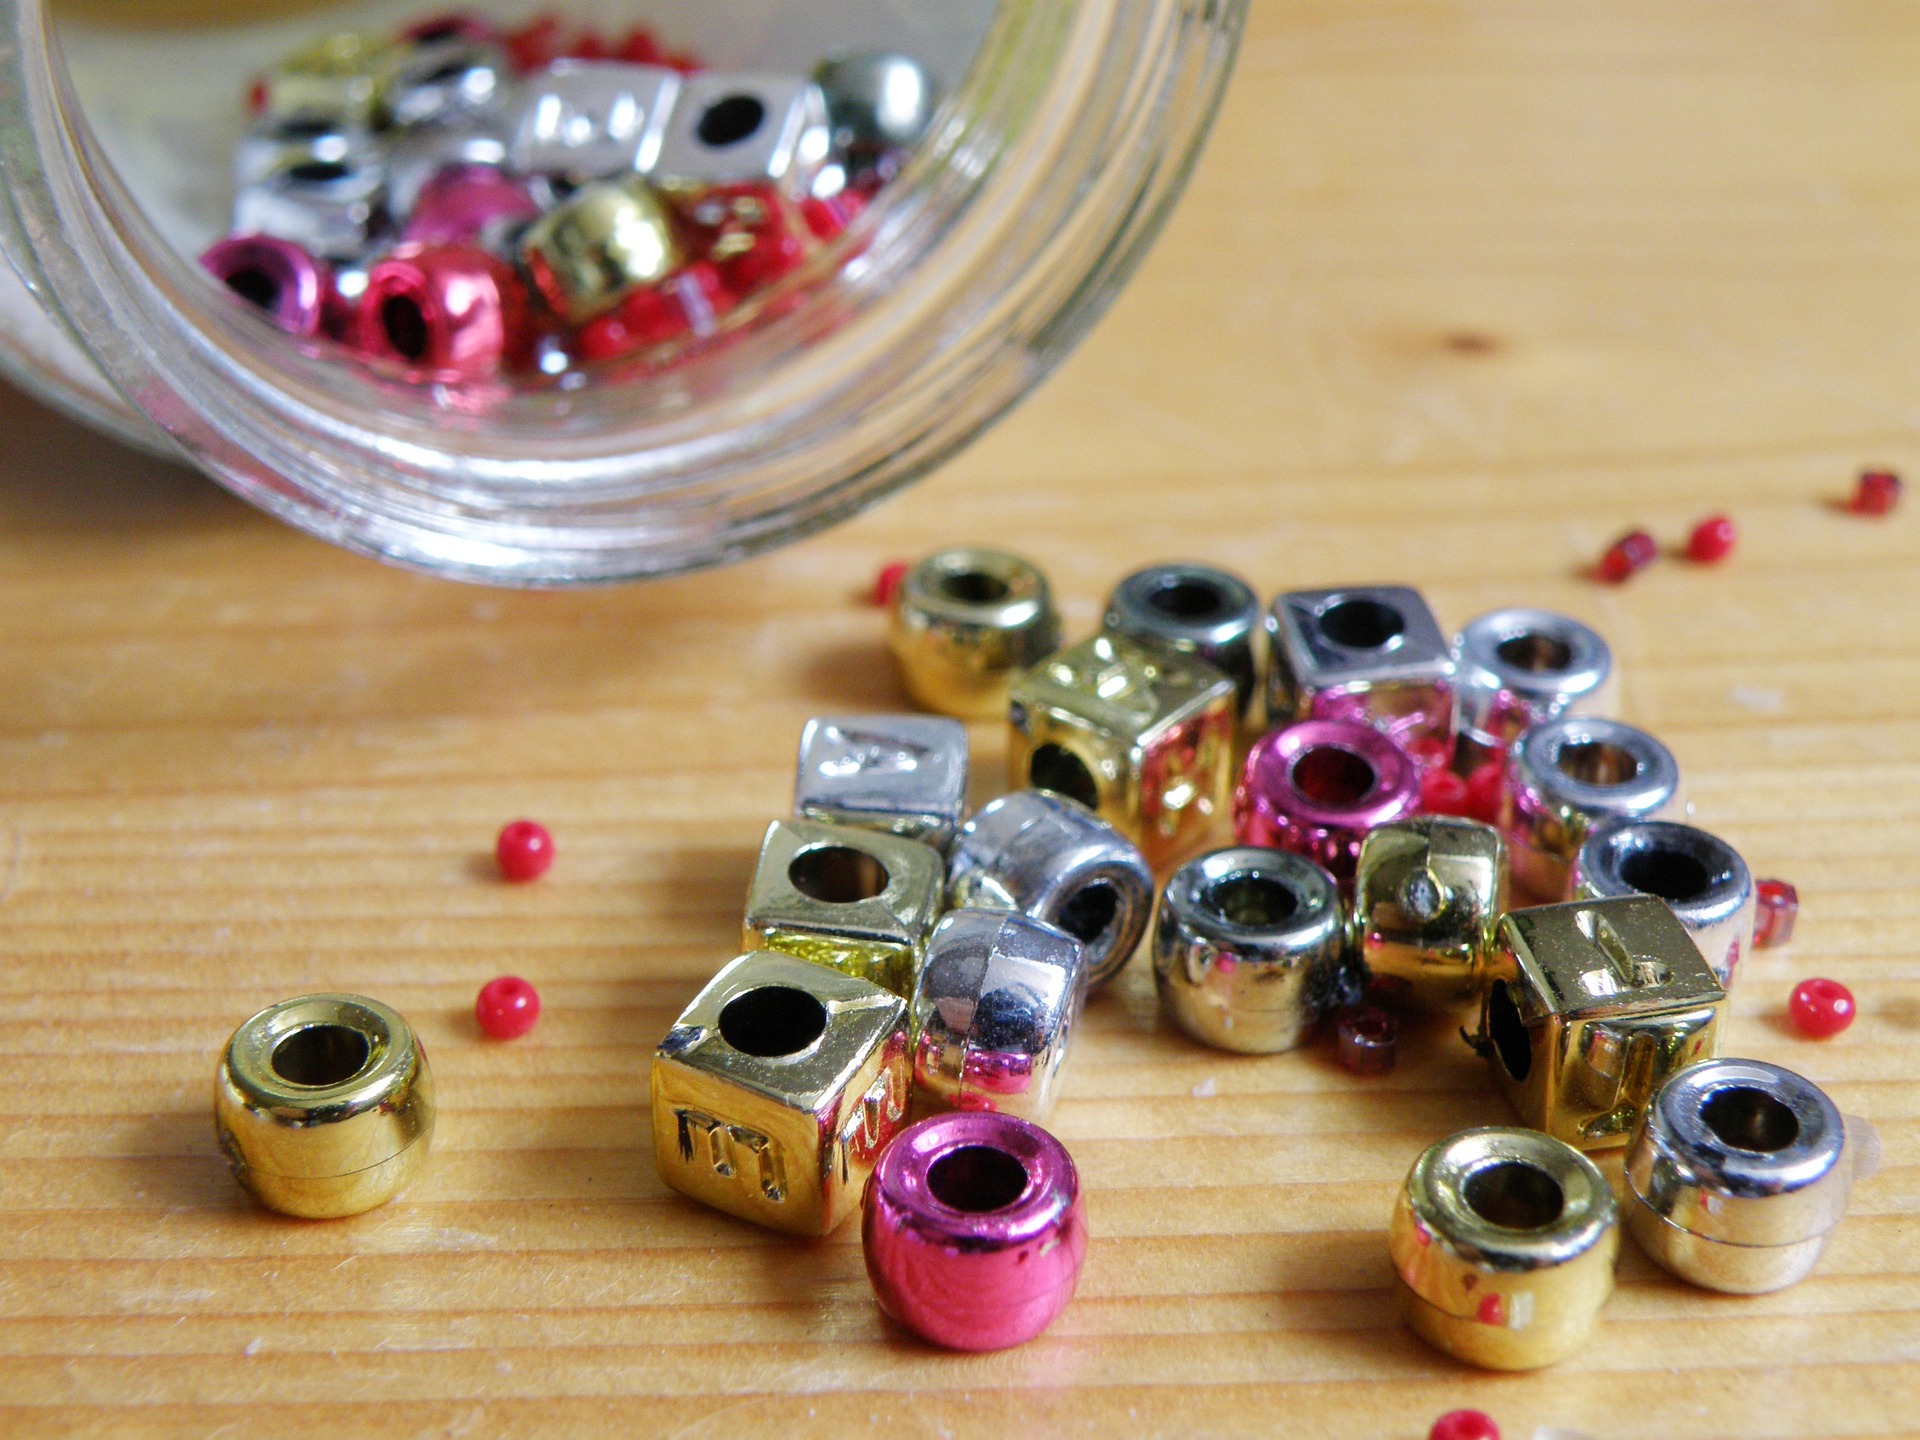 Beads in different colors and sizes spilling from a jar